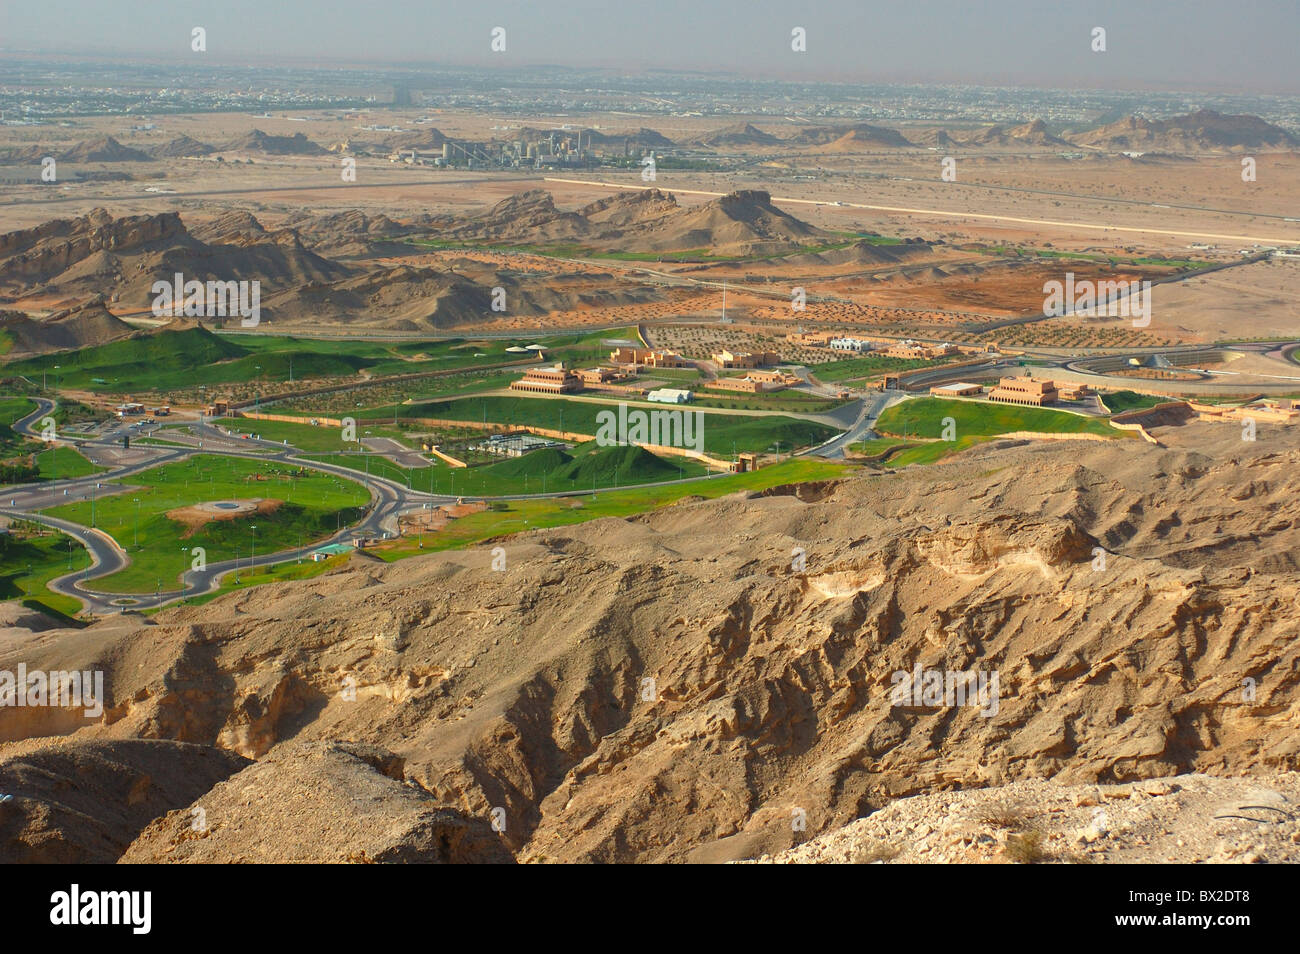 scenery overview settlement artificially irrigation green desert streets infrastructure settlement view fro Stock Photo